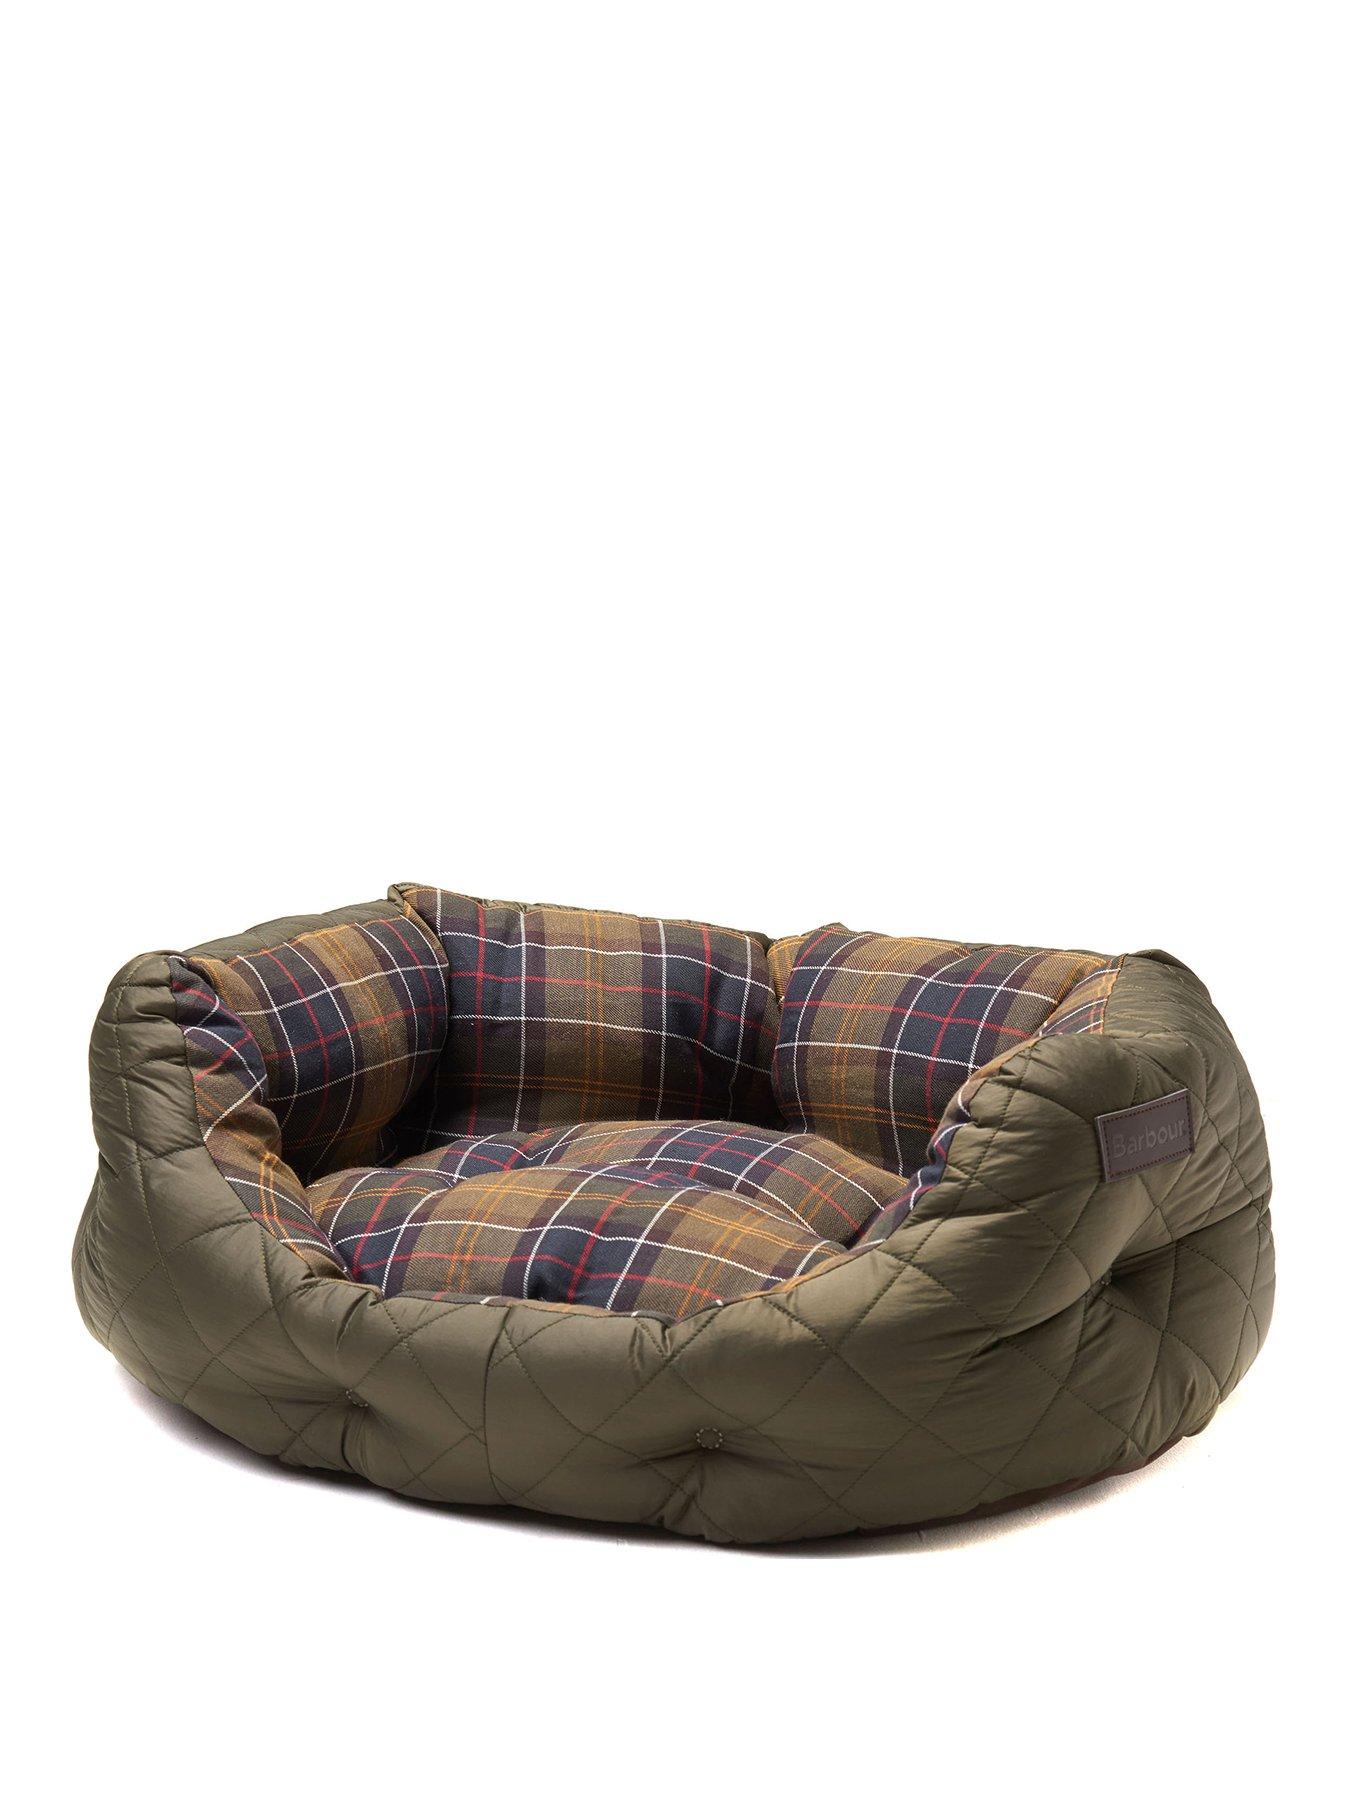 barbour dog beds Cheaper Than Retail 